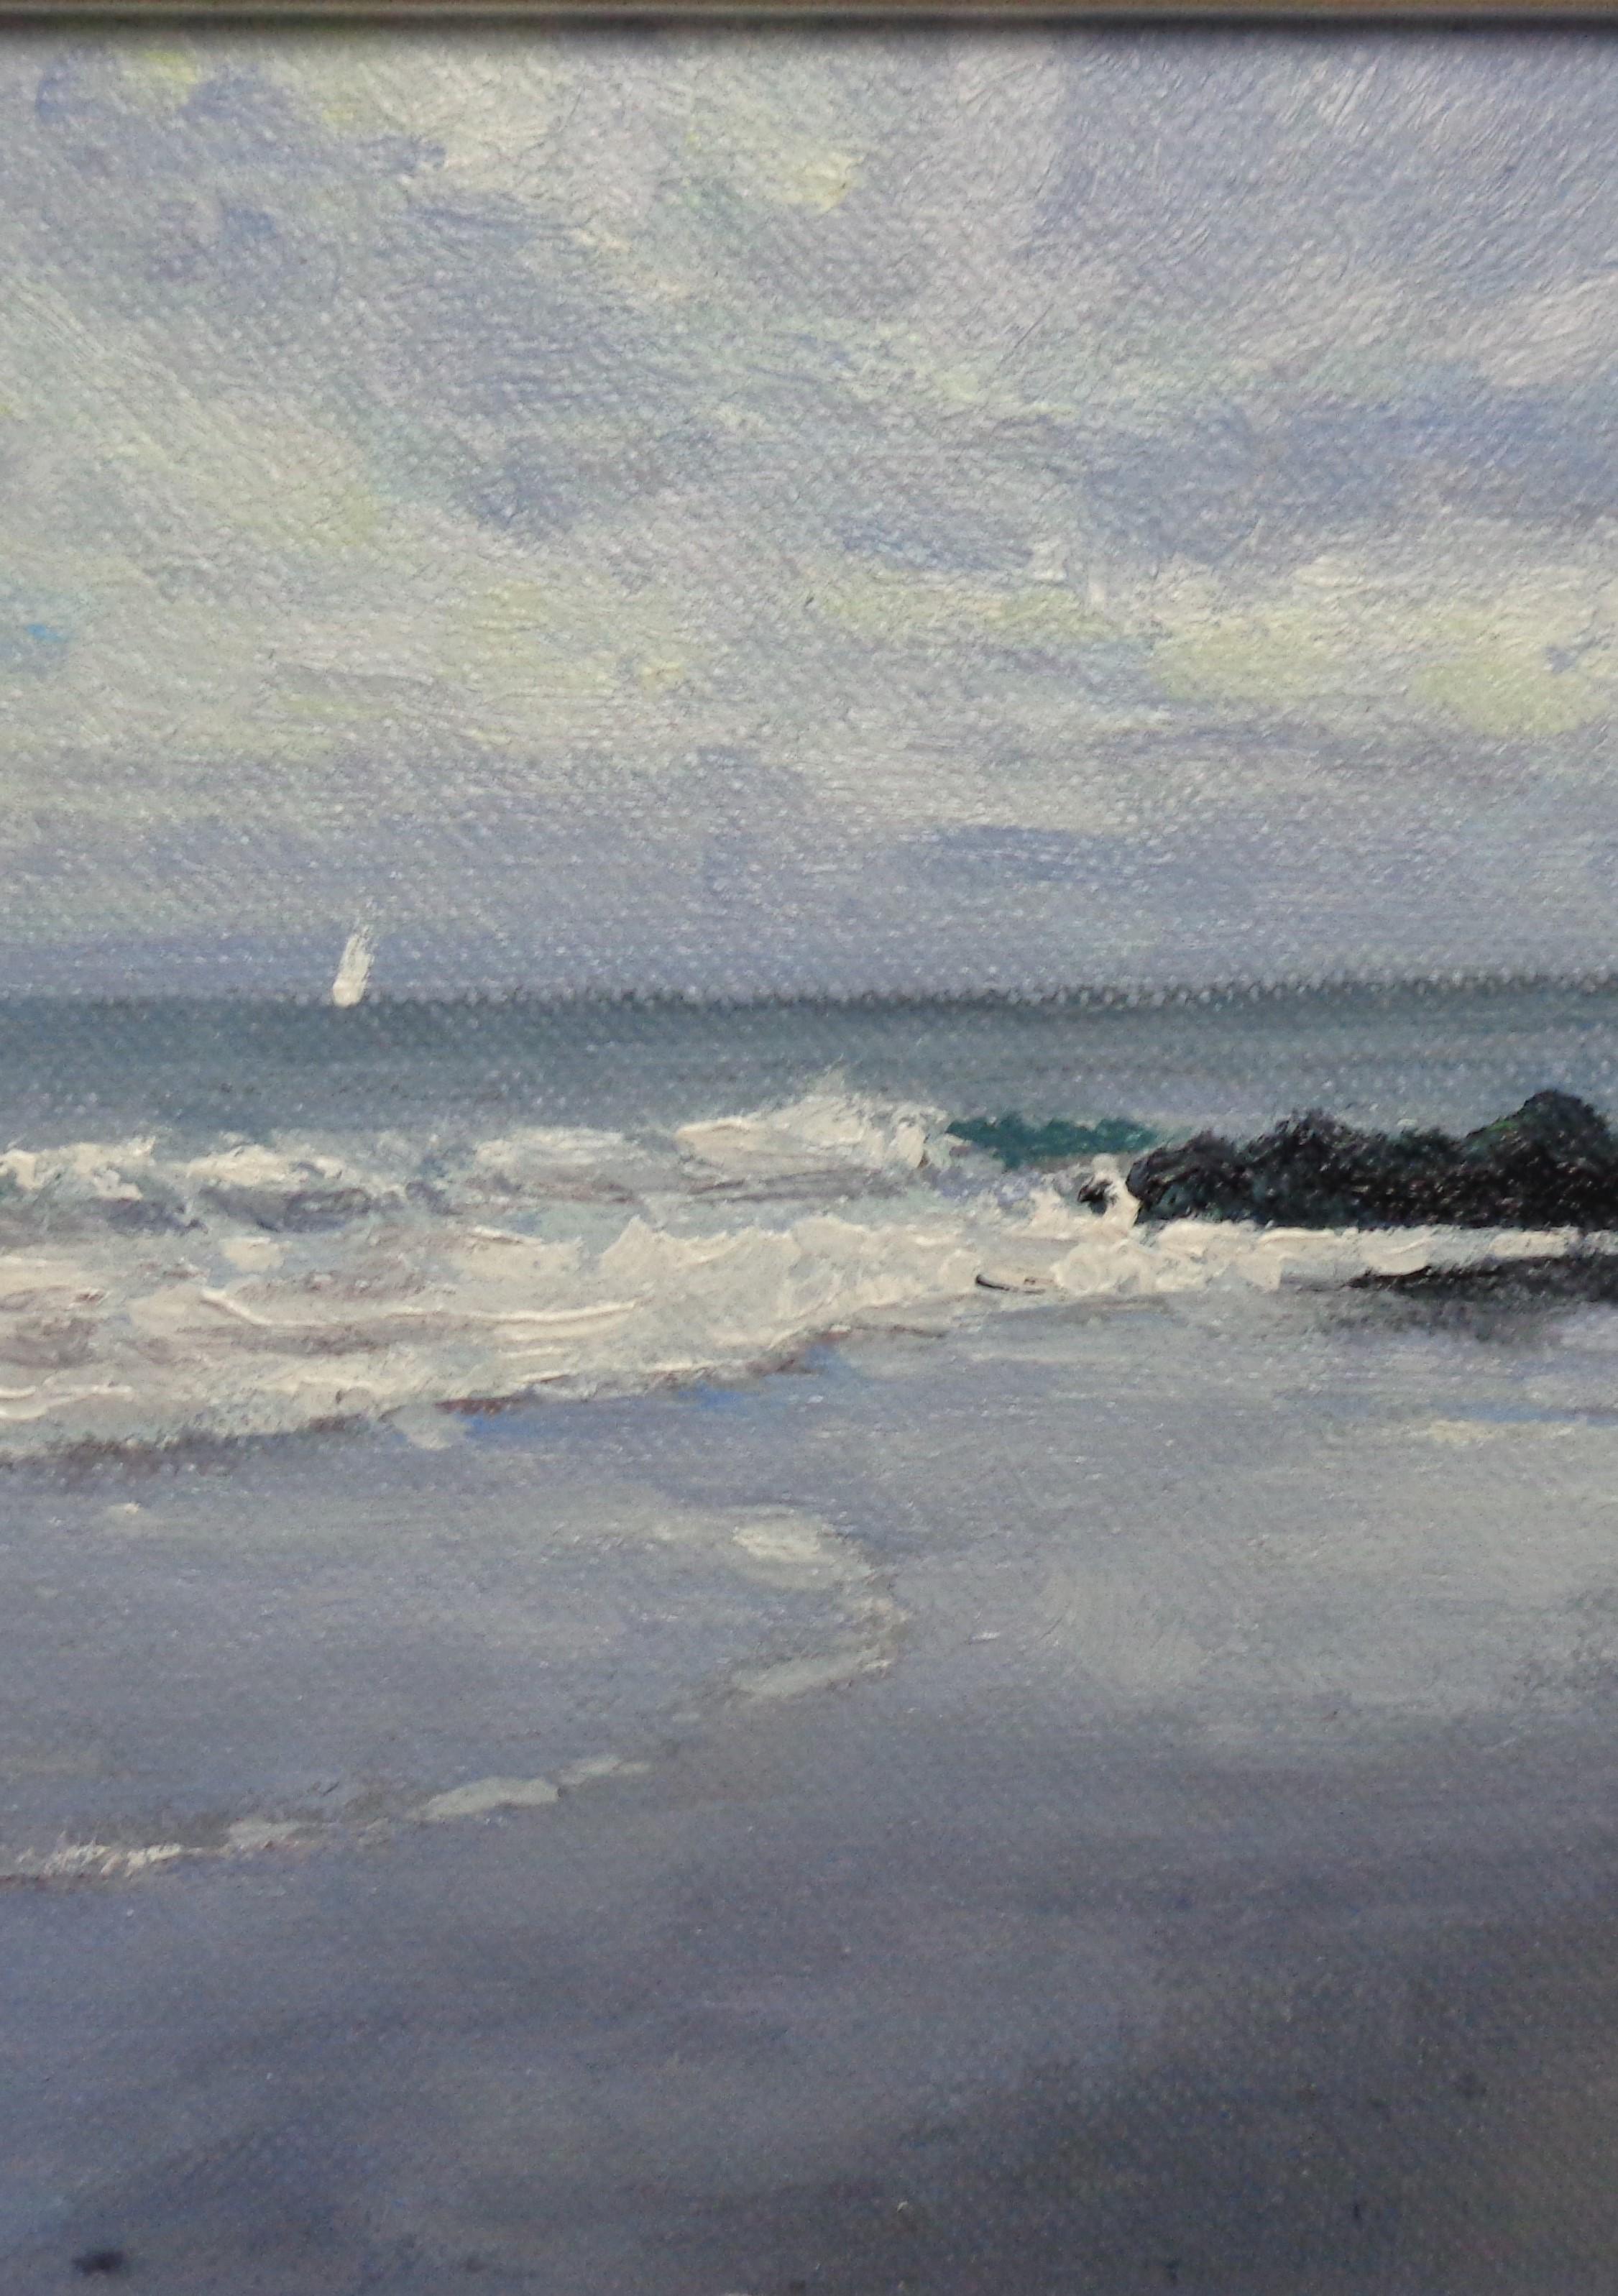  Impressionistic Seascape Oil Painting Michael Budden Beach Ocean Sail Boat Surf For Sale 4